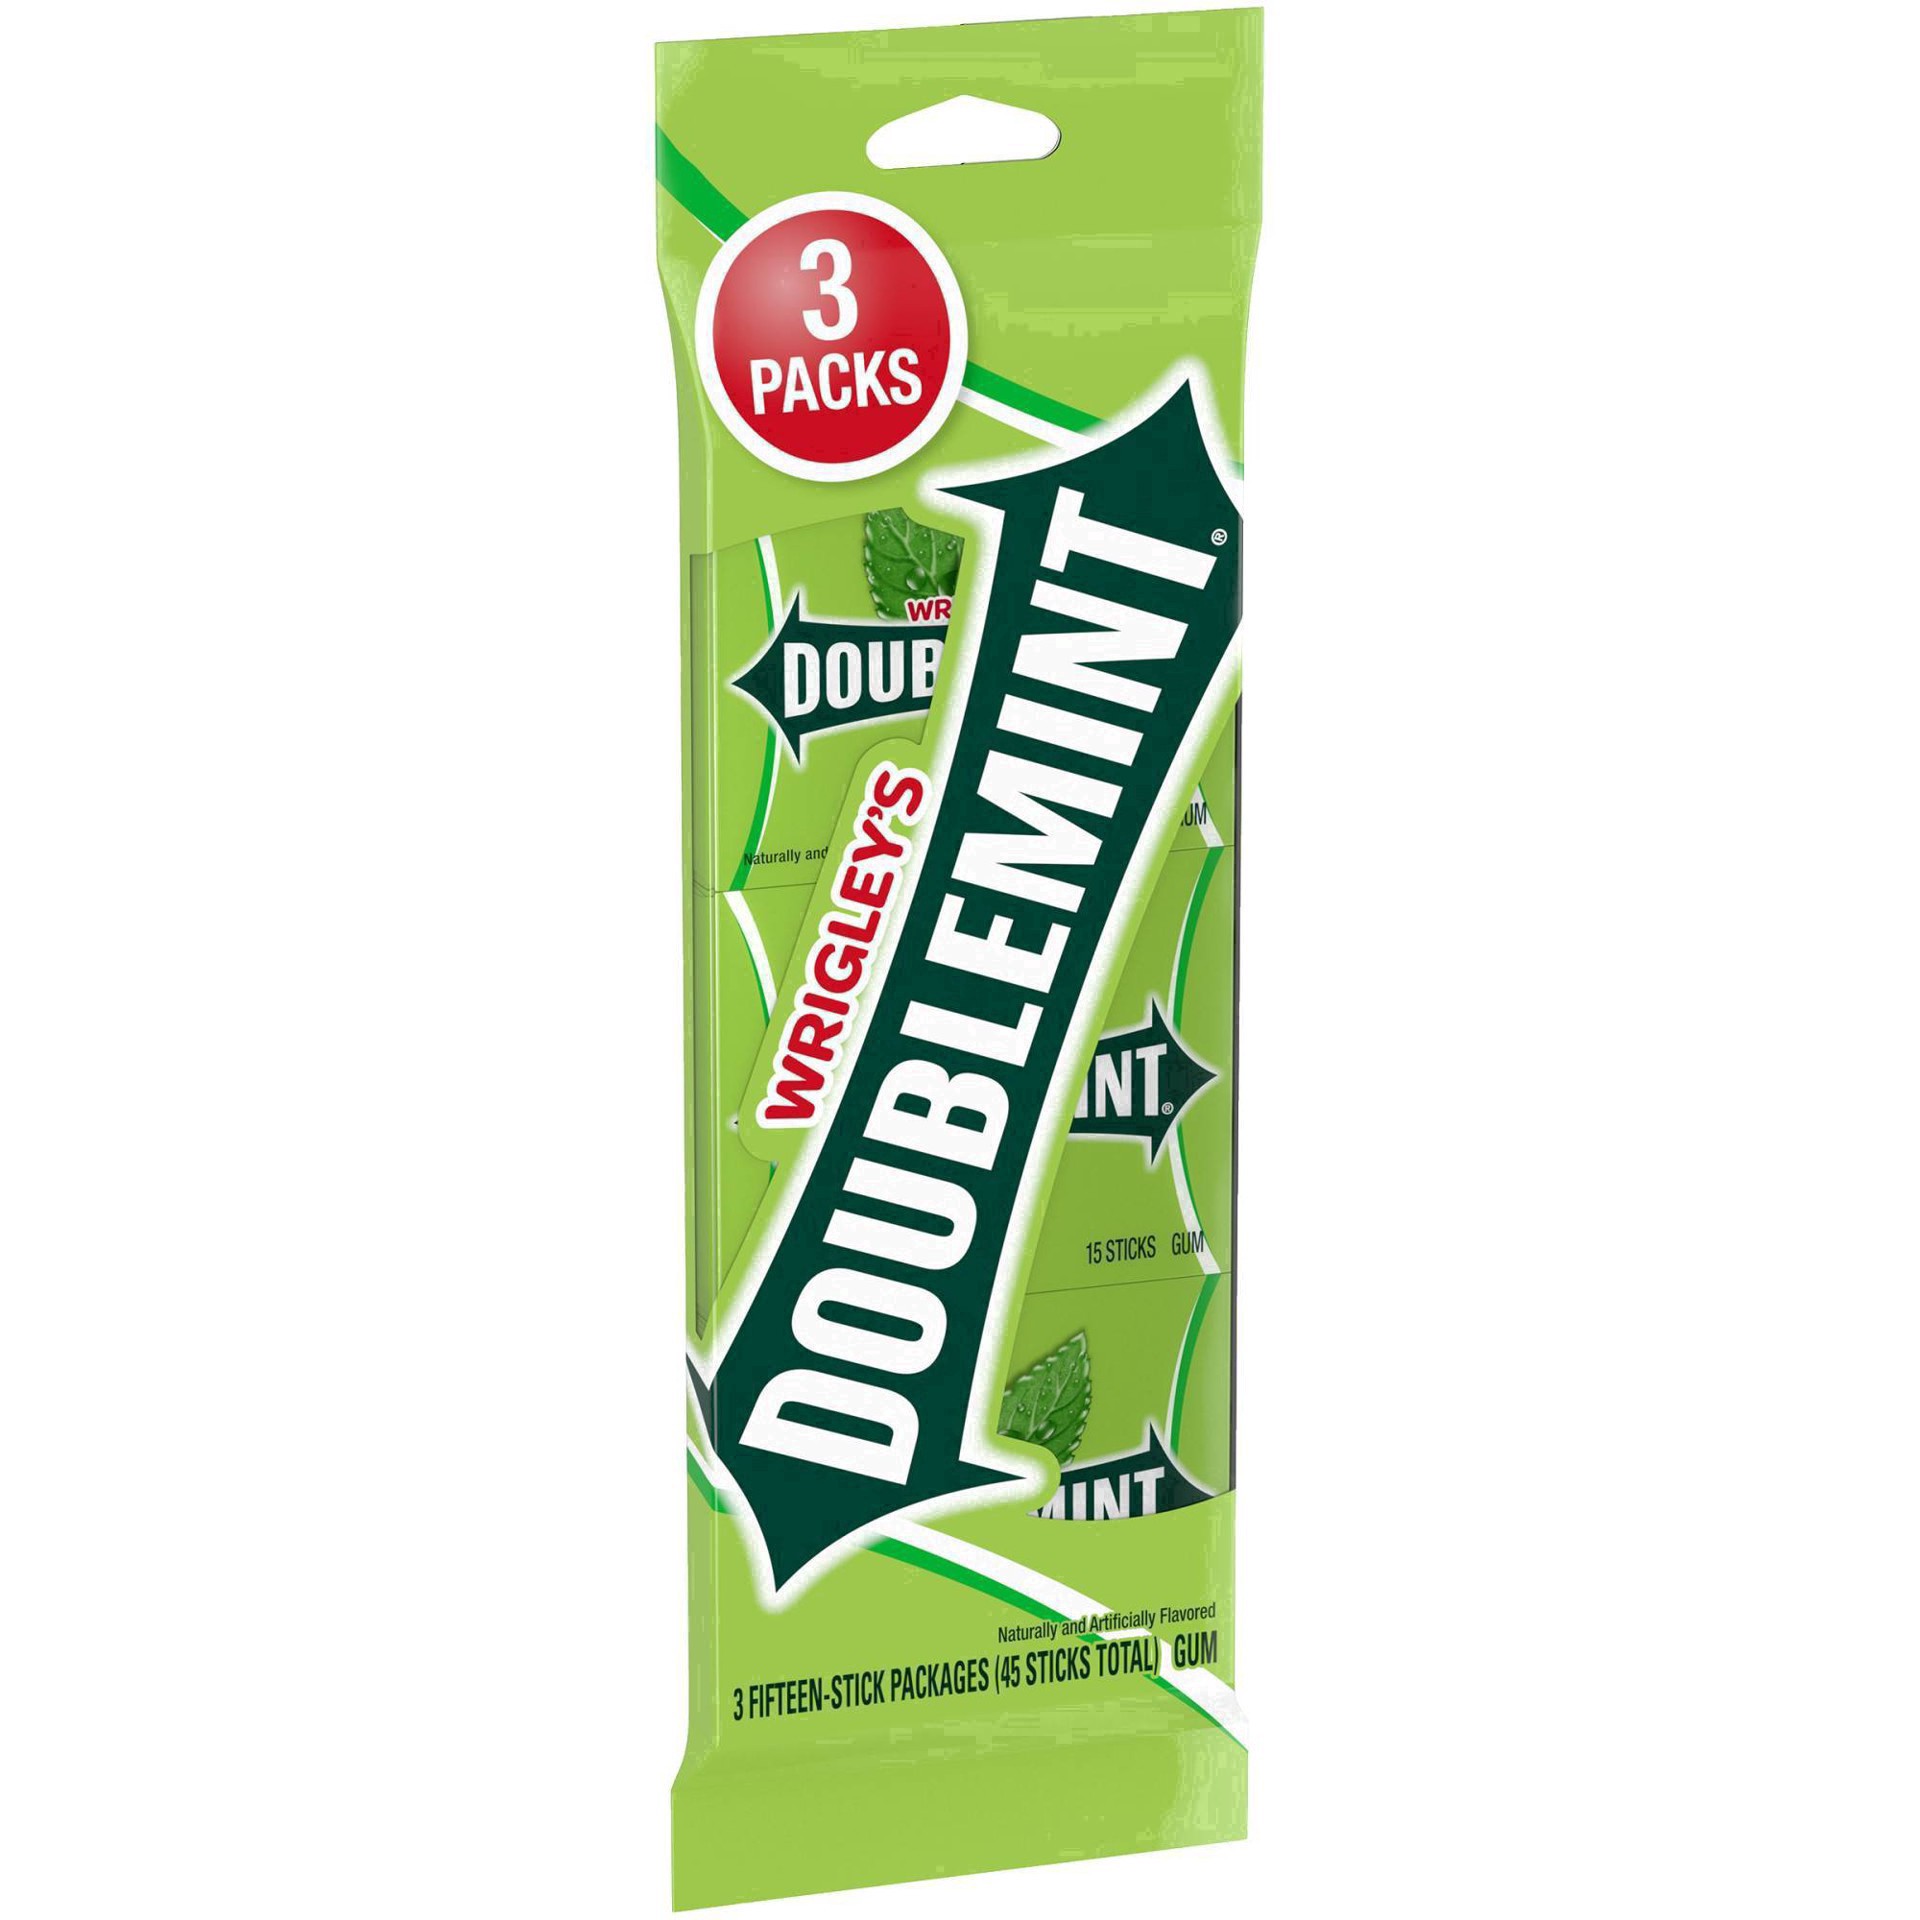 slide 61 of 134, Doublemint WRIGLEY'S DOUBLEMINT Bulk Chewing Gum, Value Pack, 15 ct (3 Pack), 45 ct